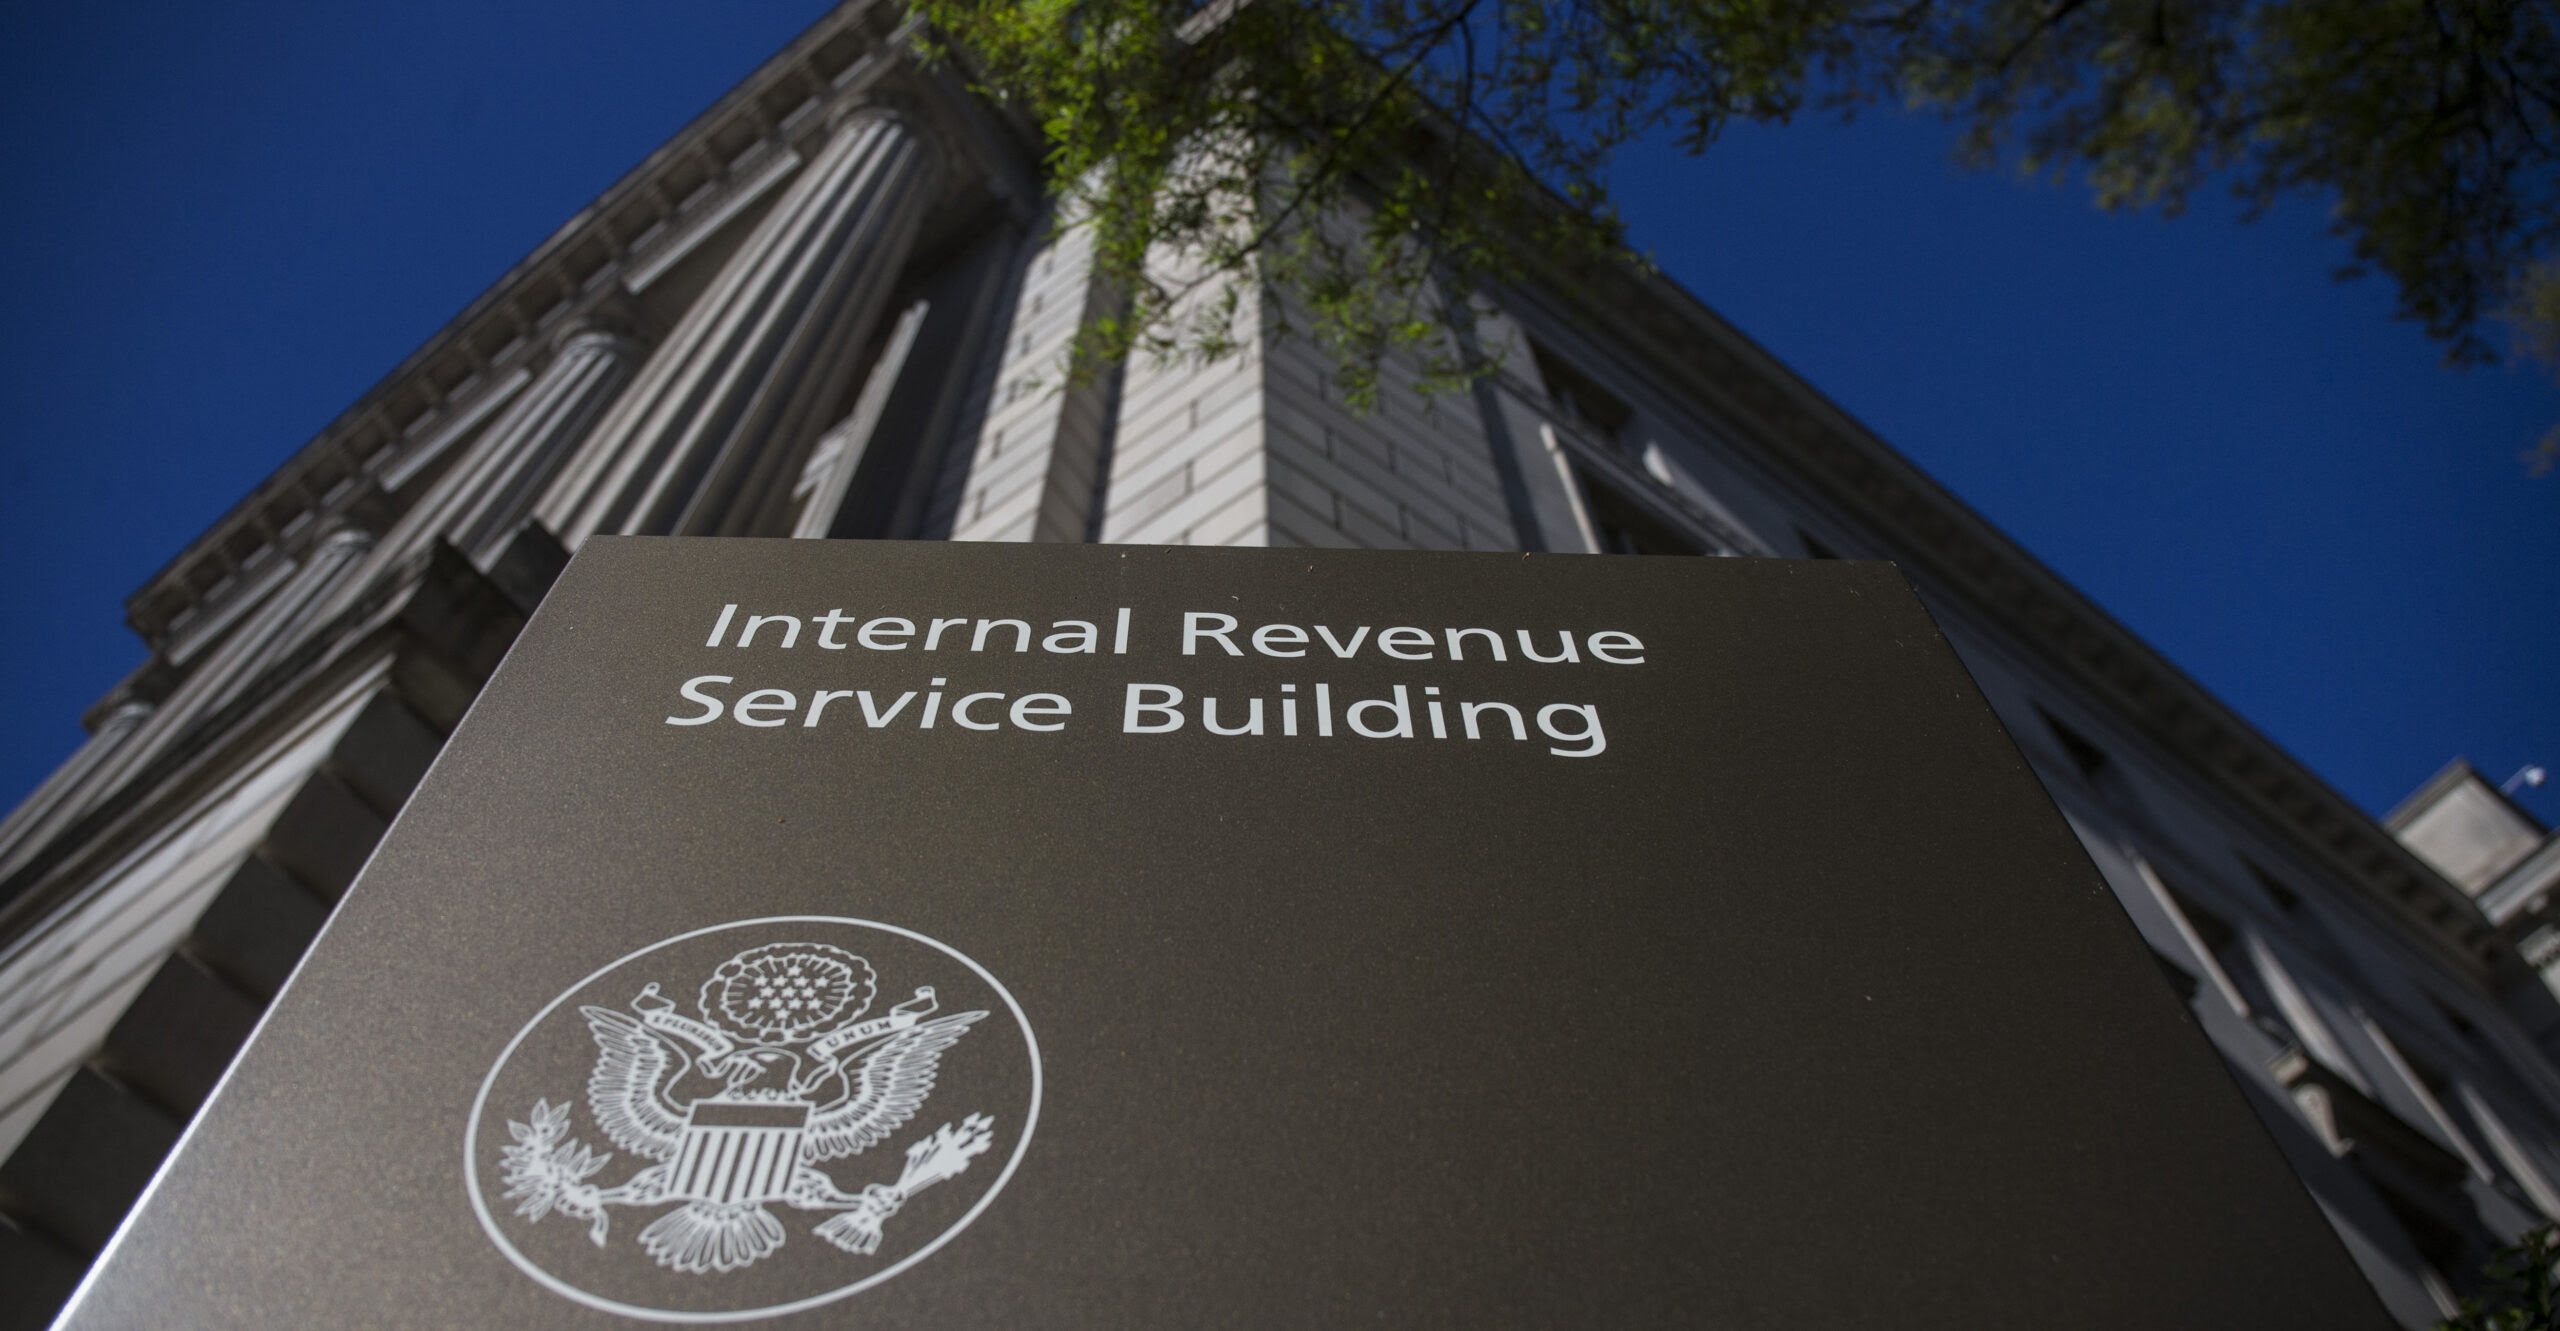 IRS Denies Tax Exemption to Christian Group, Associates Bible With GOP 